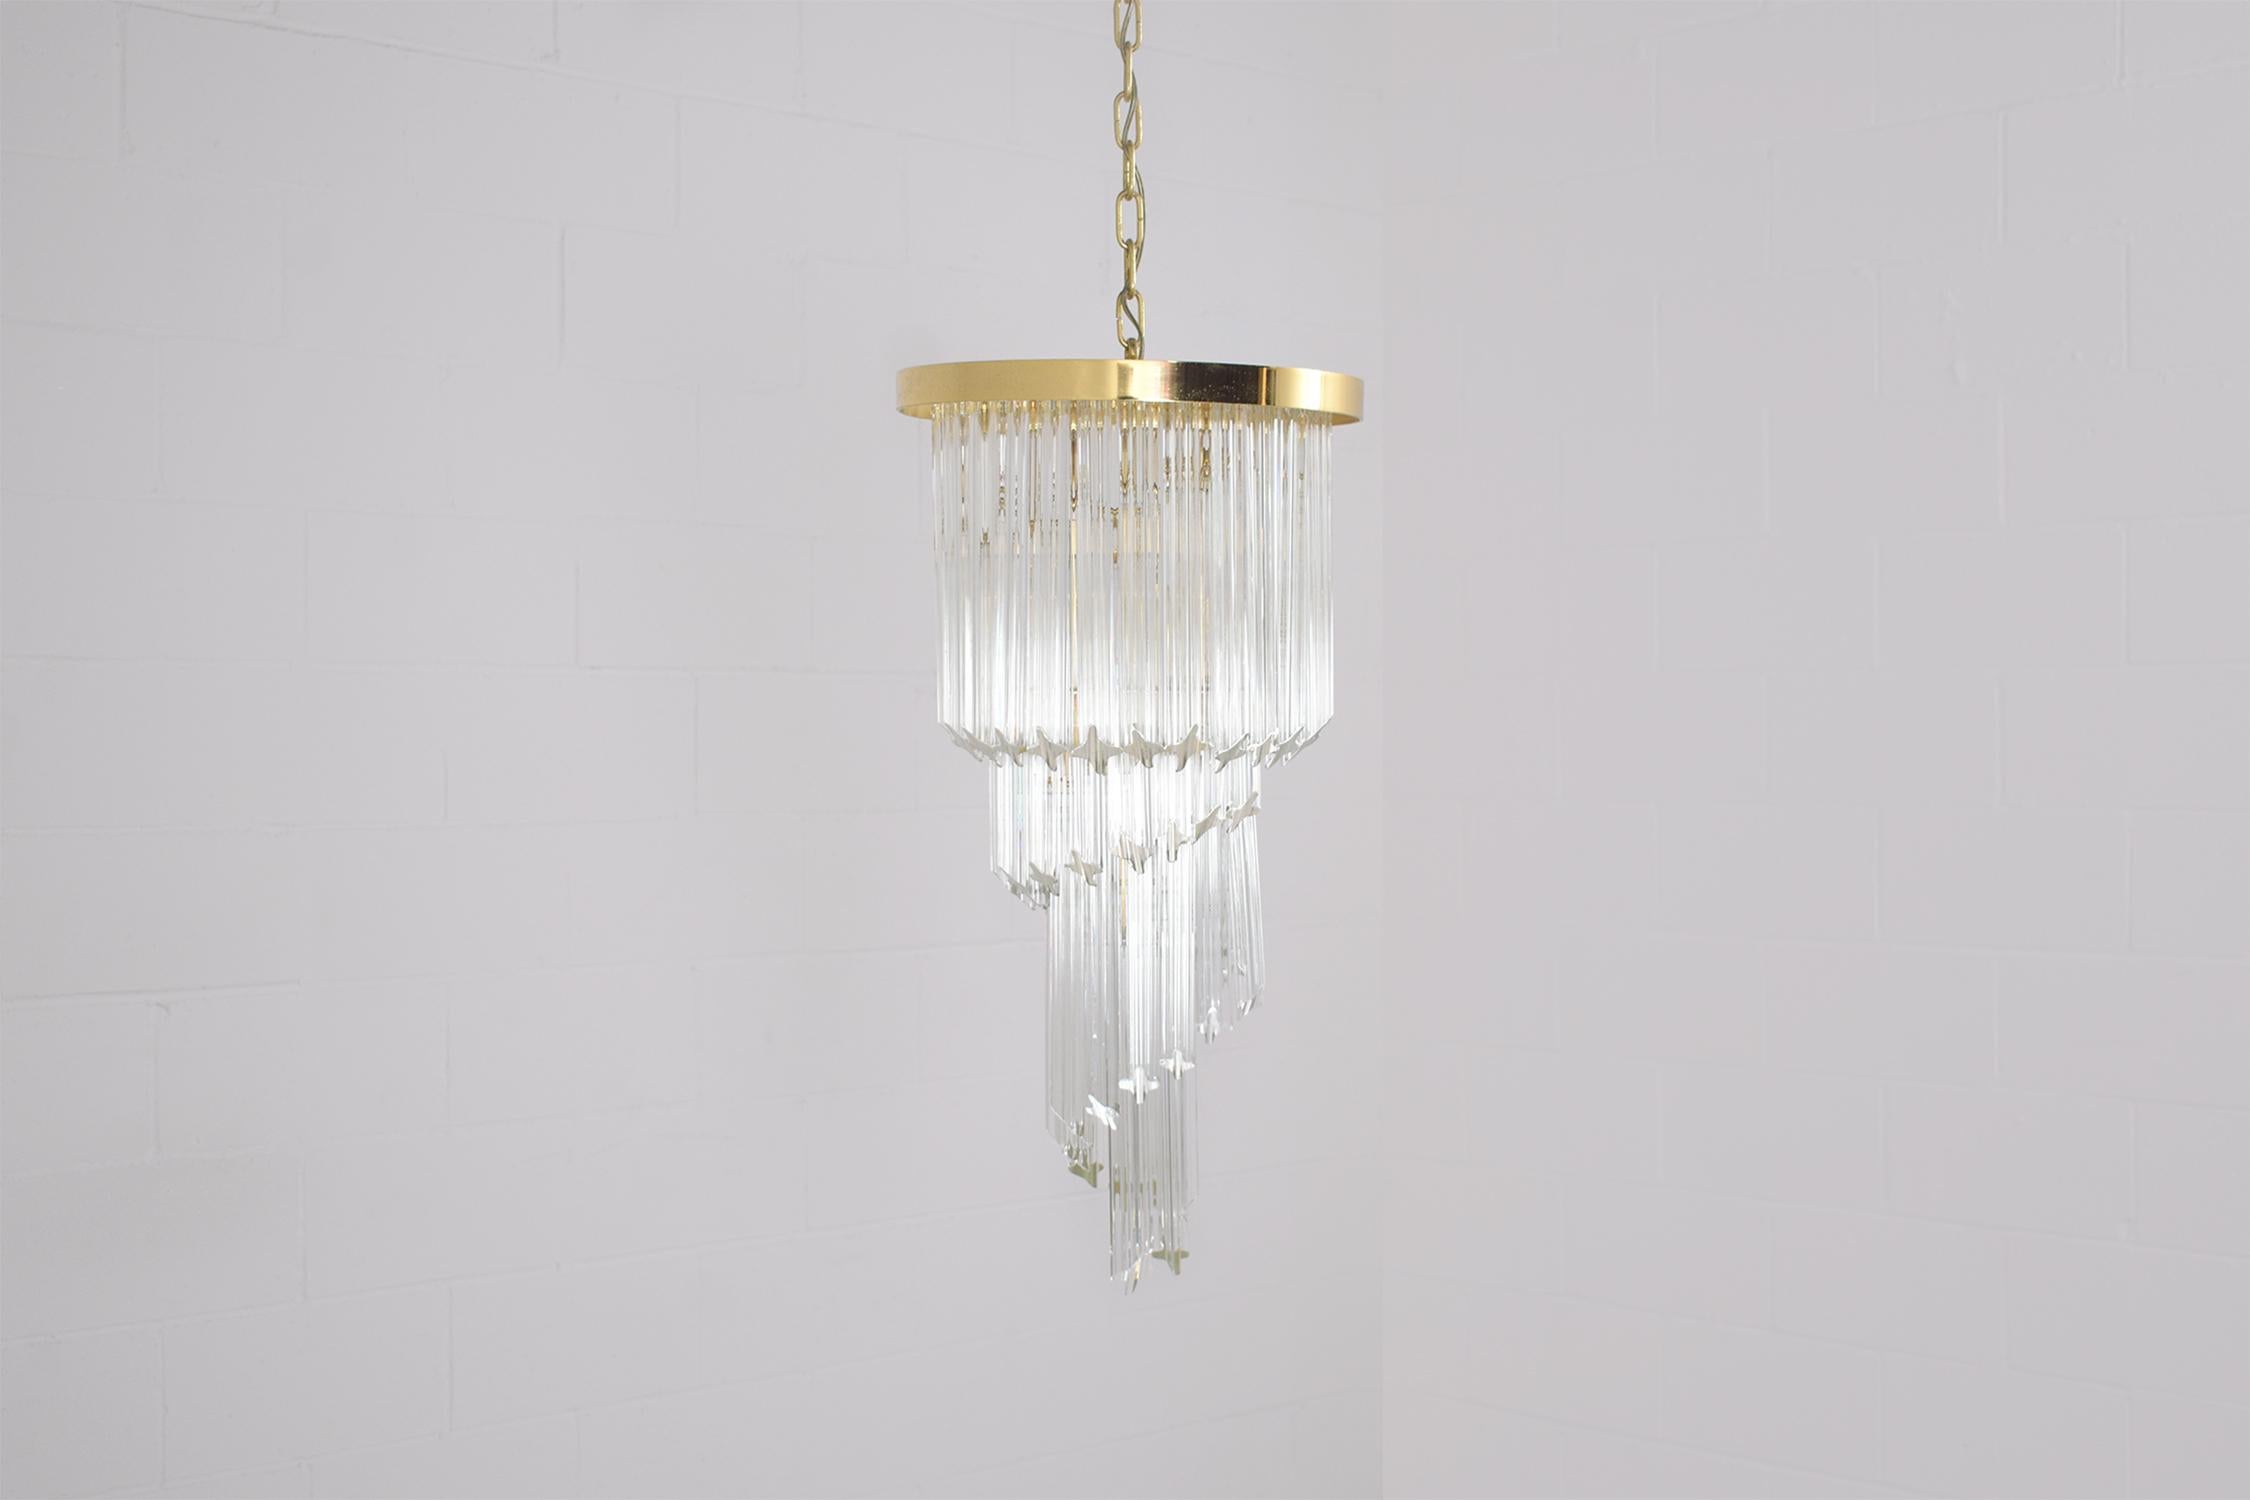 Vintage Drop Pendant Chandelier: Timeless Elegance in Brass and Glass In Good Condition For Sale In Los Angeles, CA